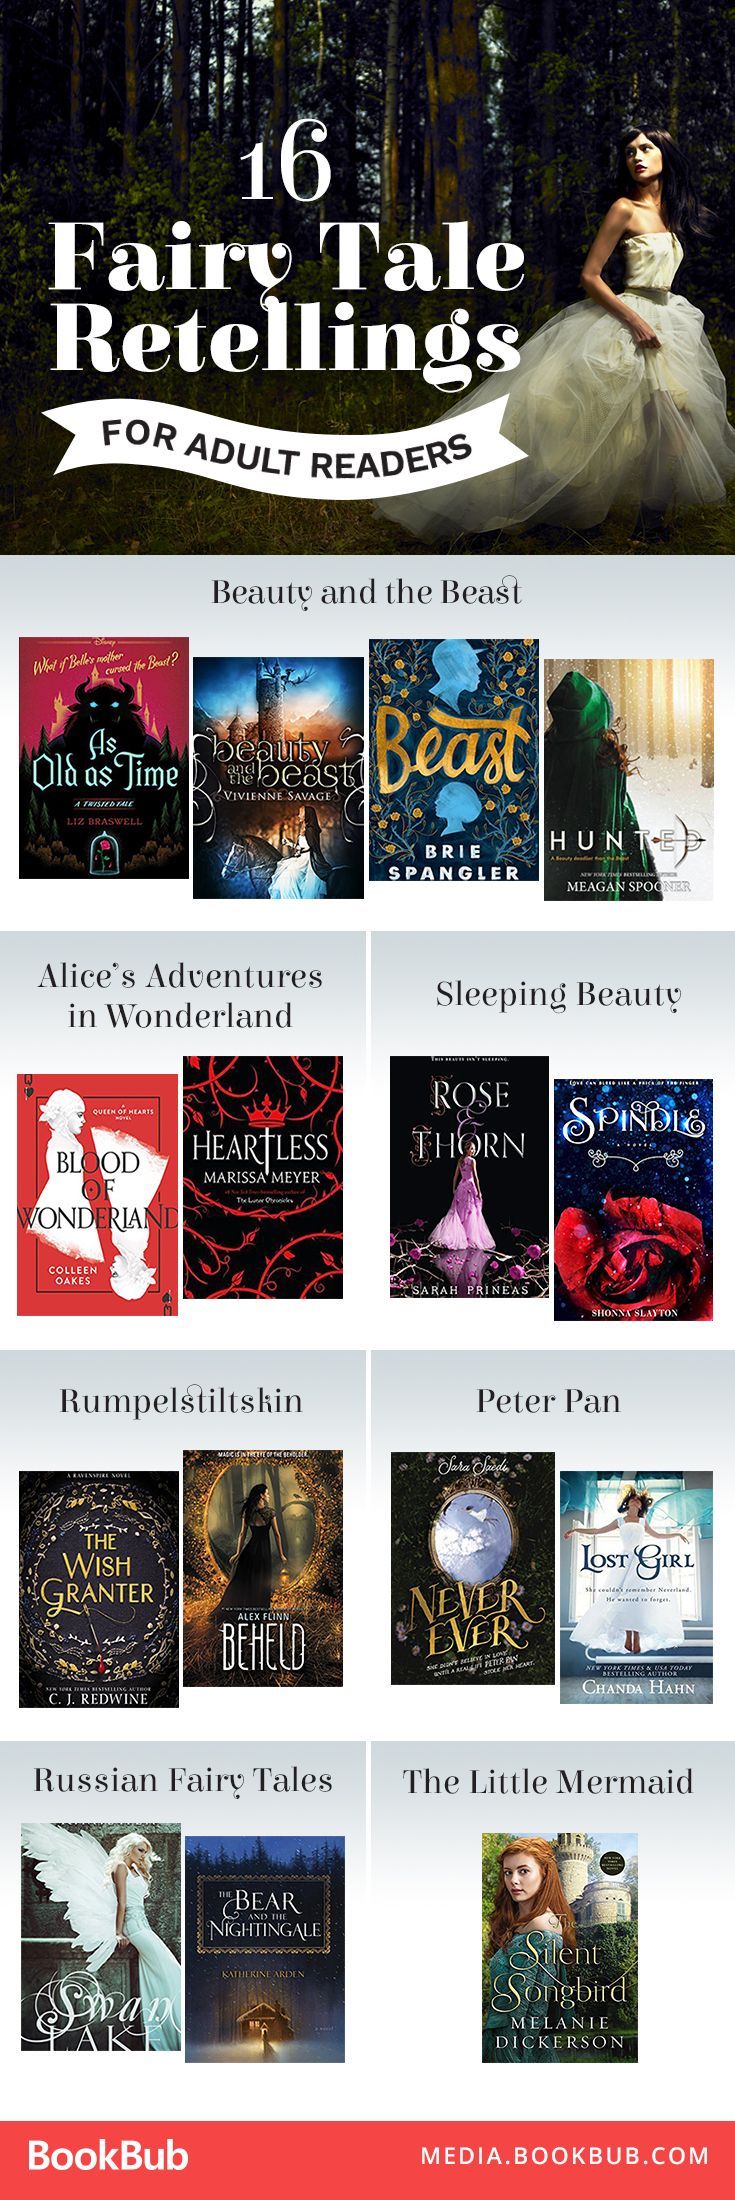 These books worth reading put a twist on your favorite classic fairy tales.